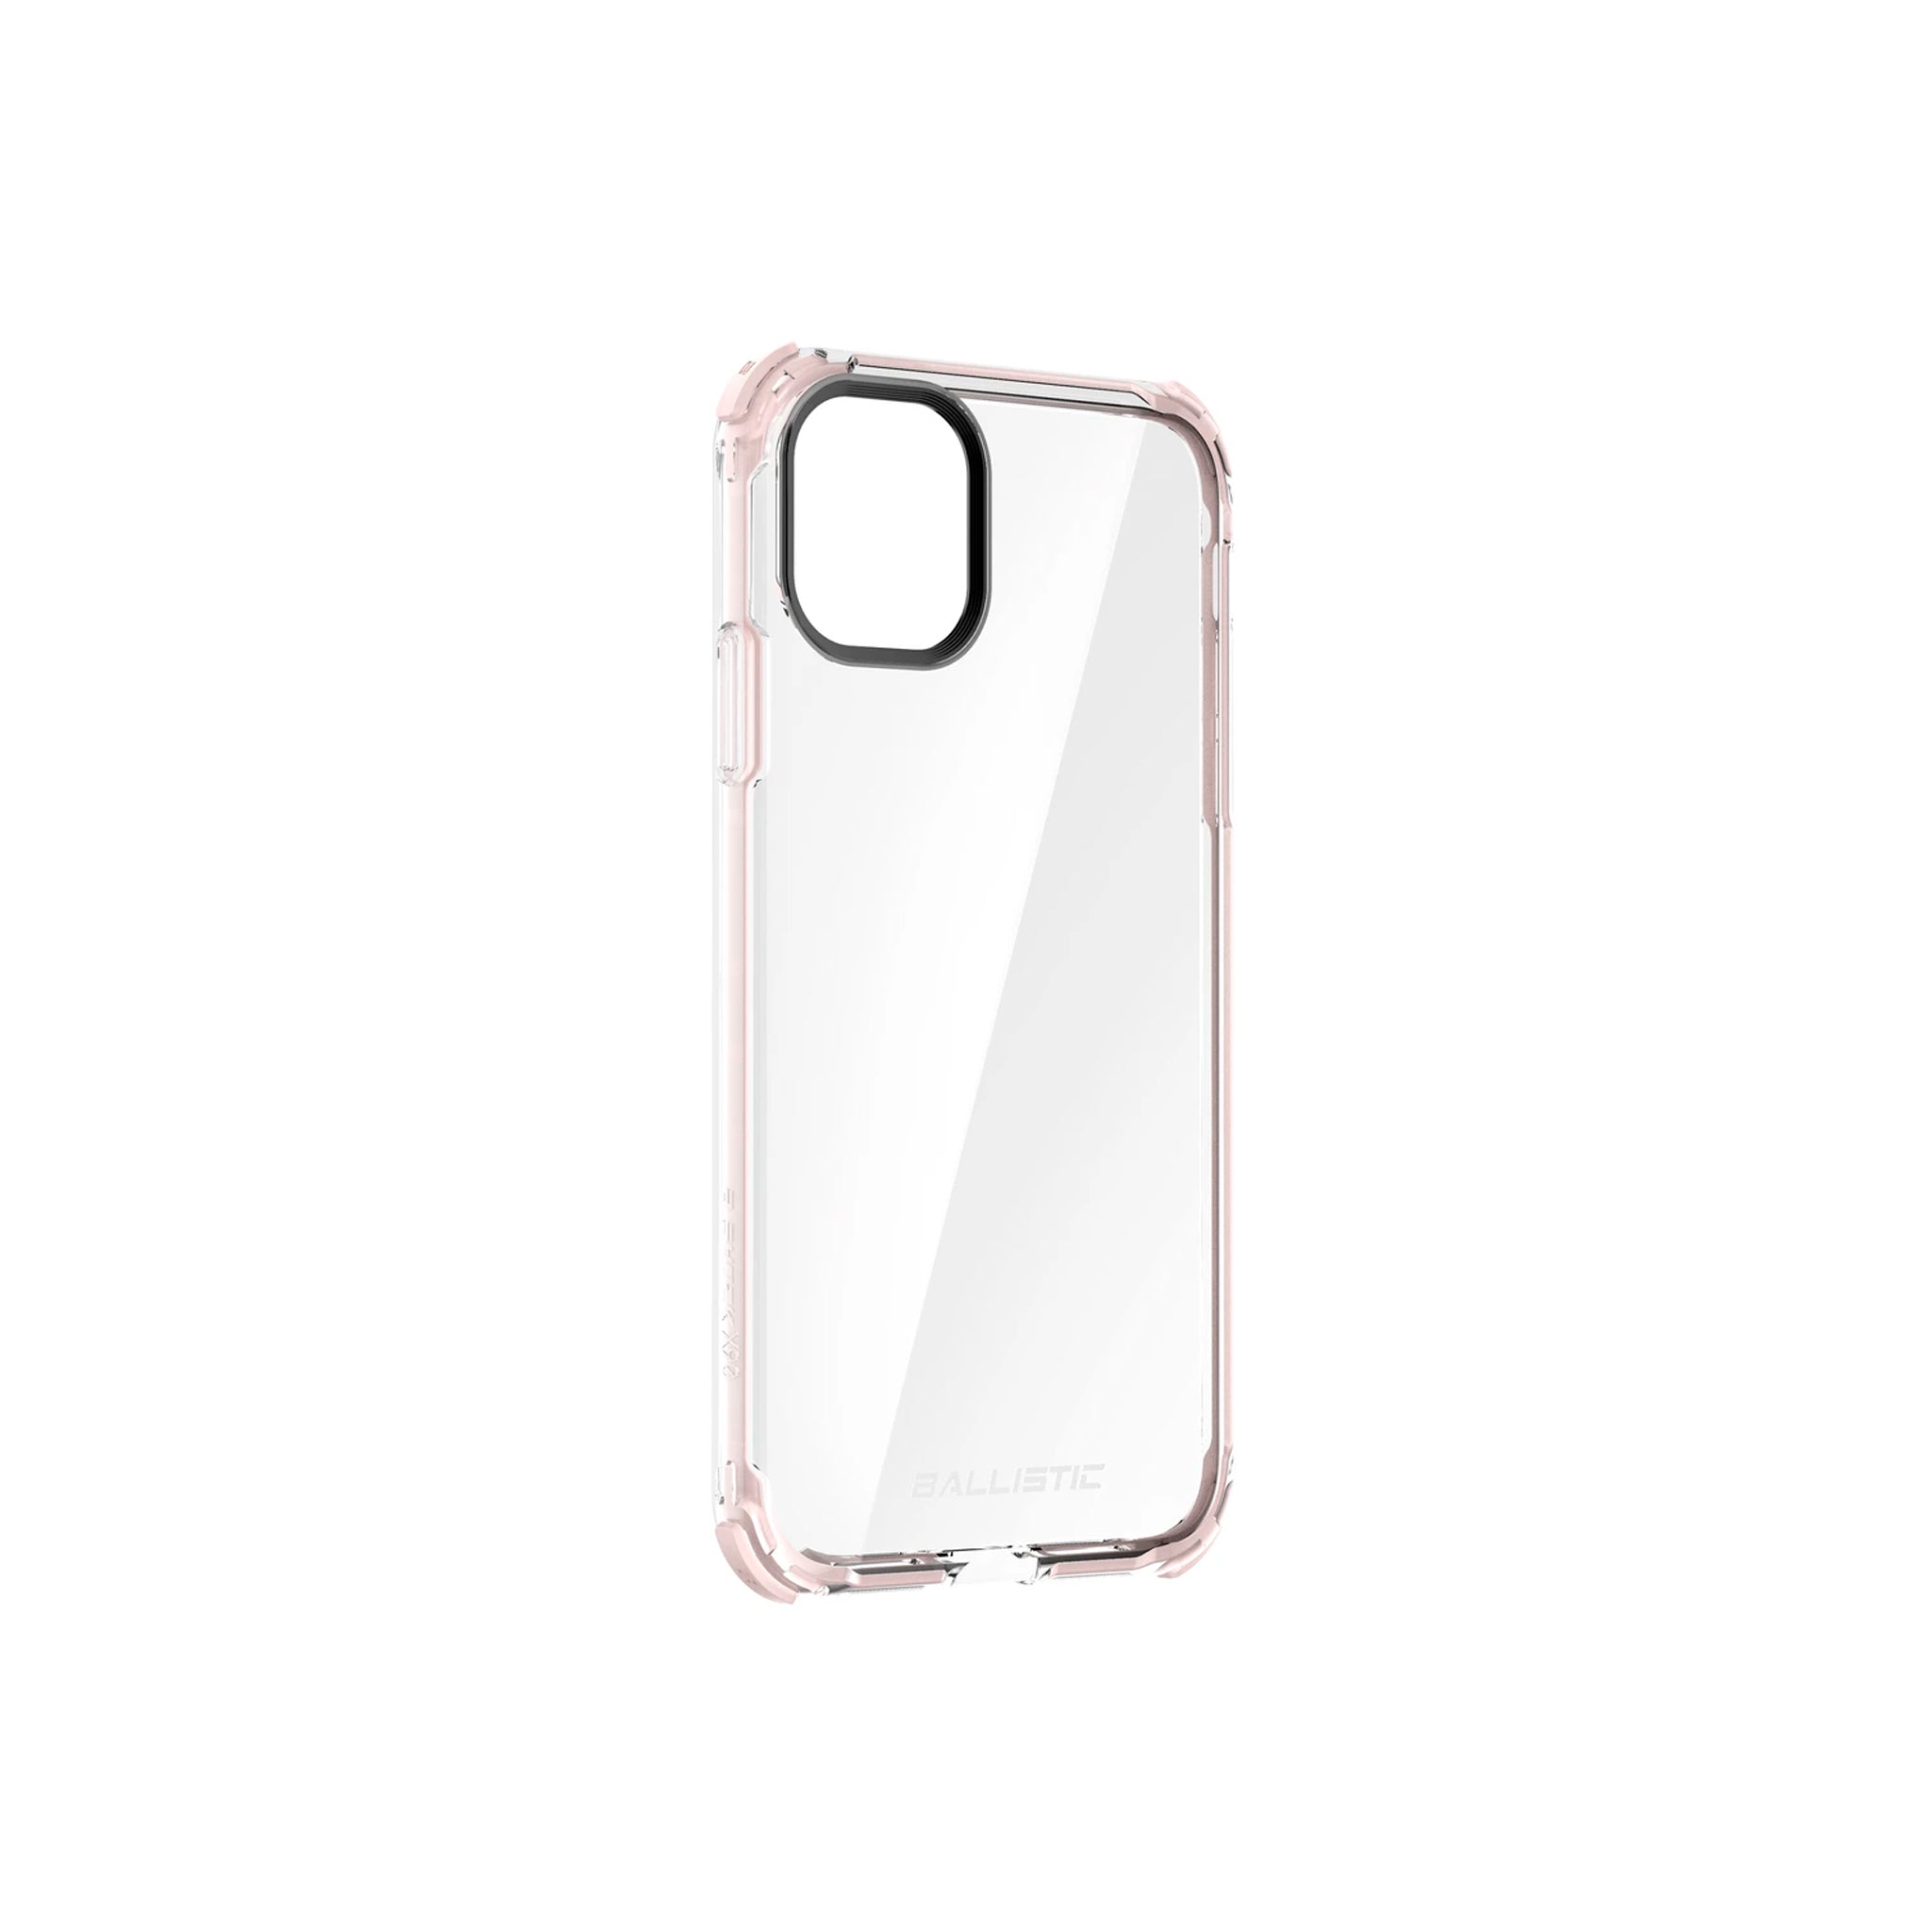 Ballistic - Bshock X90 Series For iPhone 11 Pro Max  - White